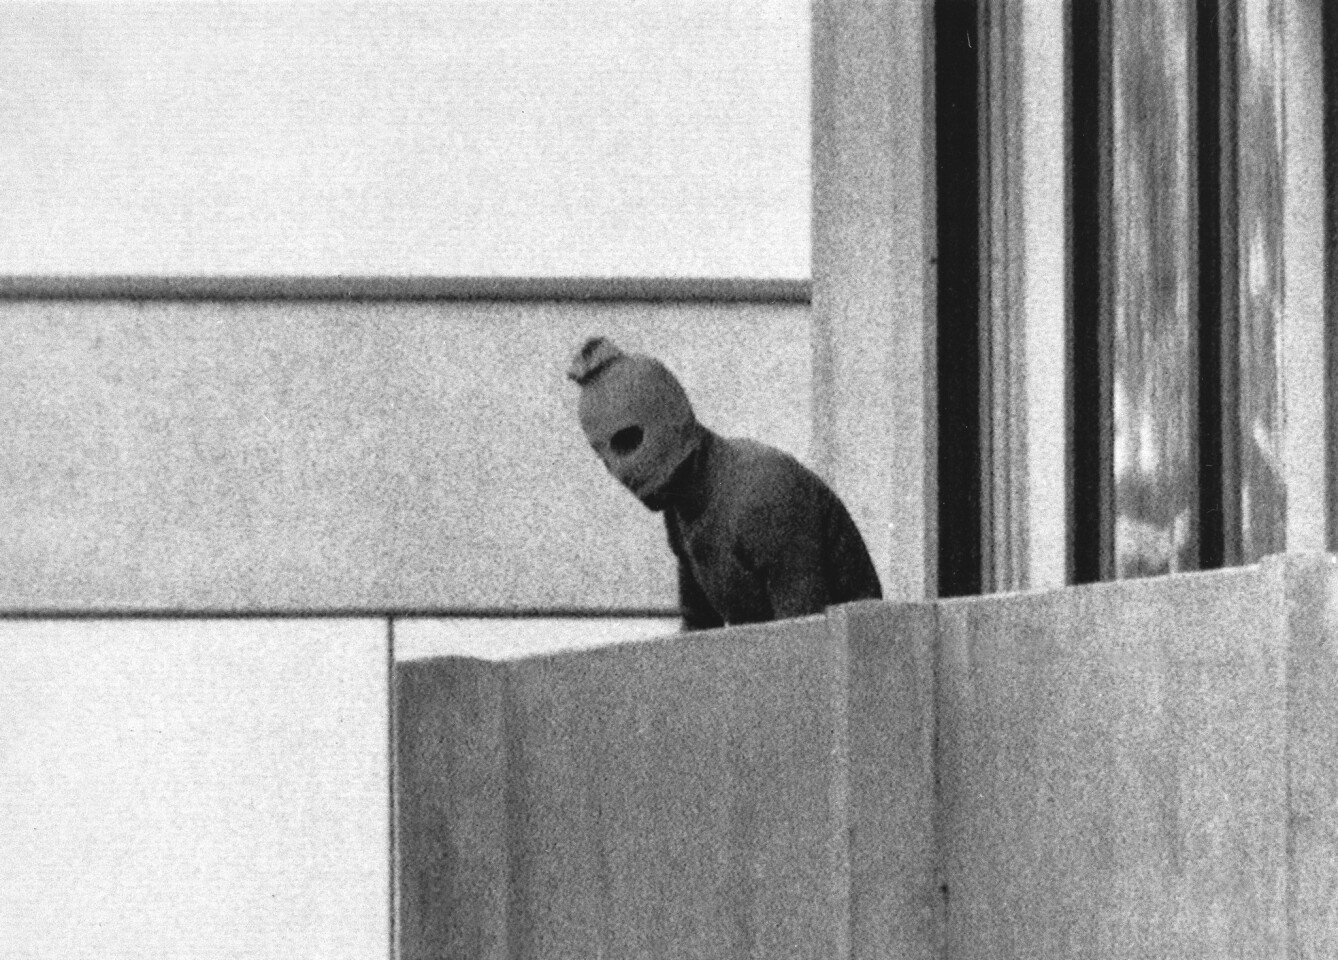 FILE - In this Sept. 5, 1972 b/w file photo, a member of the Arab Commando group which seized members of the Israeli Olympic Team at their quarters at the Munich Olympic Village appears with a hood over his face on the balcony of the village building where the commandos held members of the Israeli team hostage. The presidents of Germany and Israel will jointly commemorate the 45th anniversary of the death of 11 Israeli athletes killed by a Palestinian militant group during the 1972 Munich Olympics. (AP Photo/Kurt Strumpf,file)